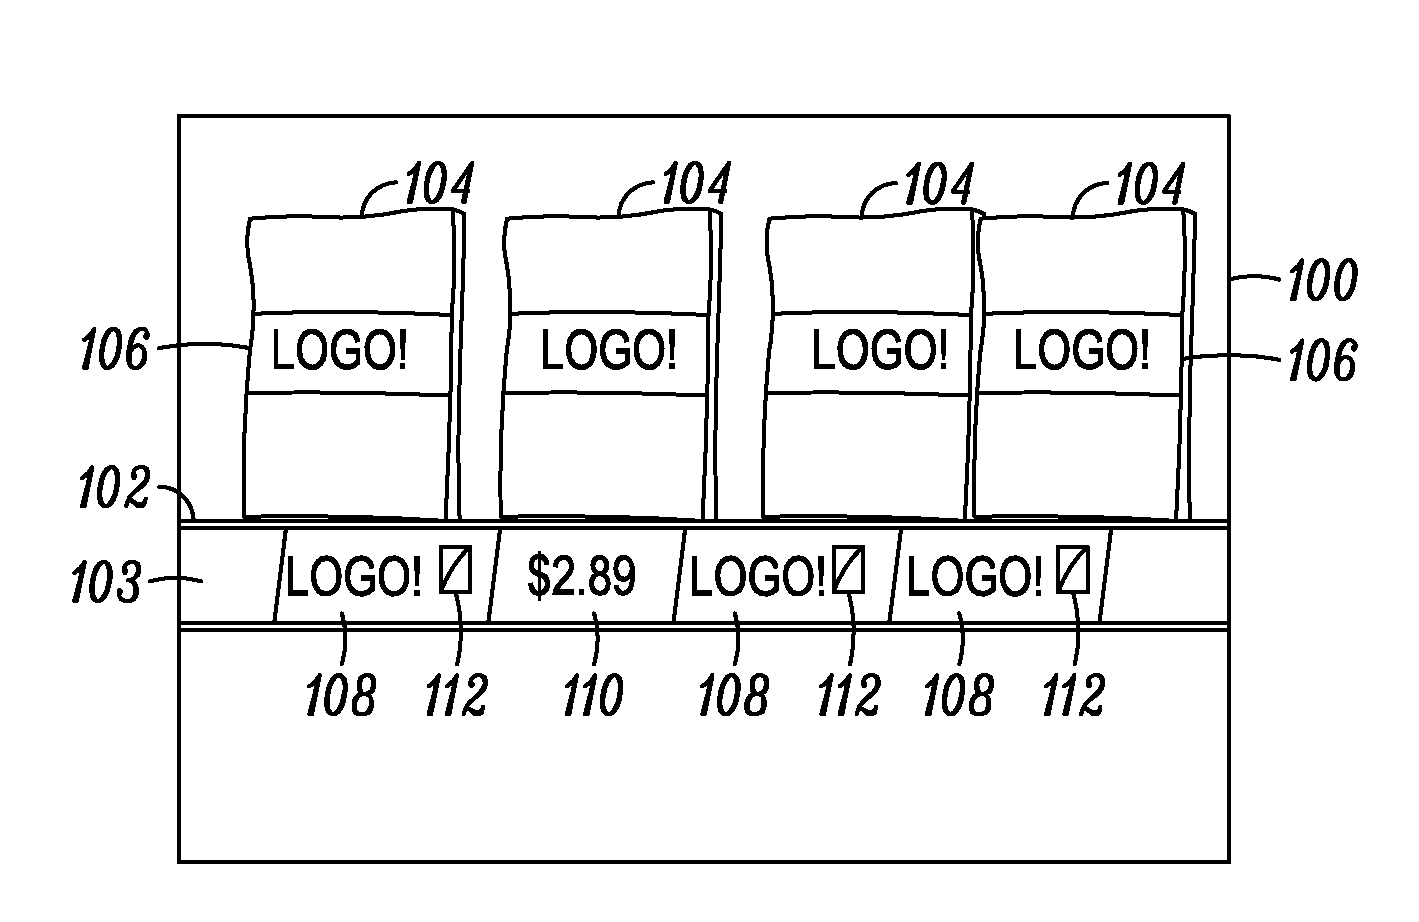 Method and apparatus for image processing to avoid counting shelf edge promotional labels when counting product labels